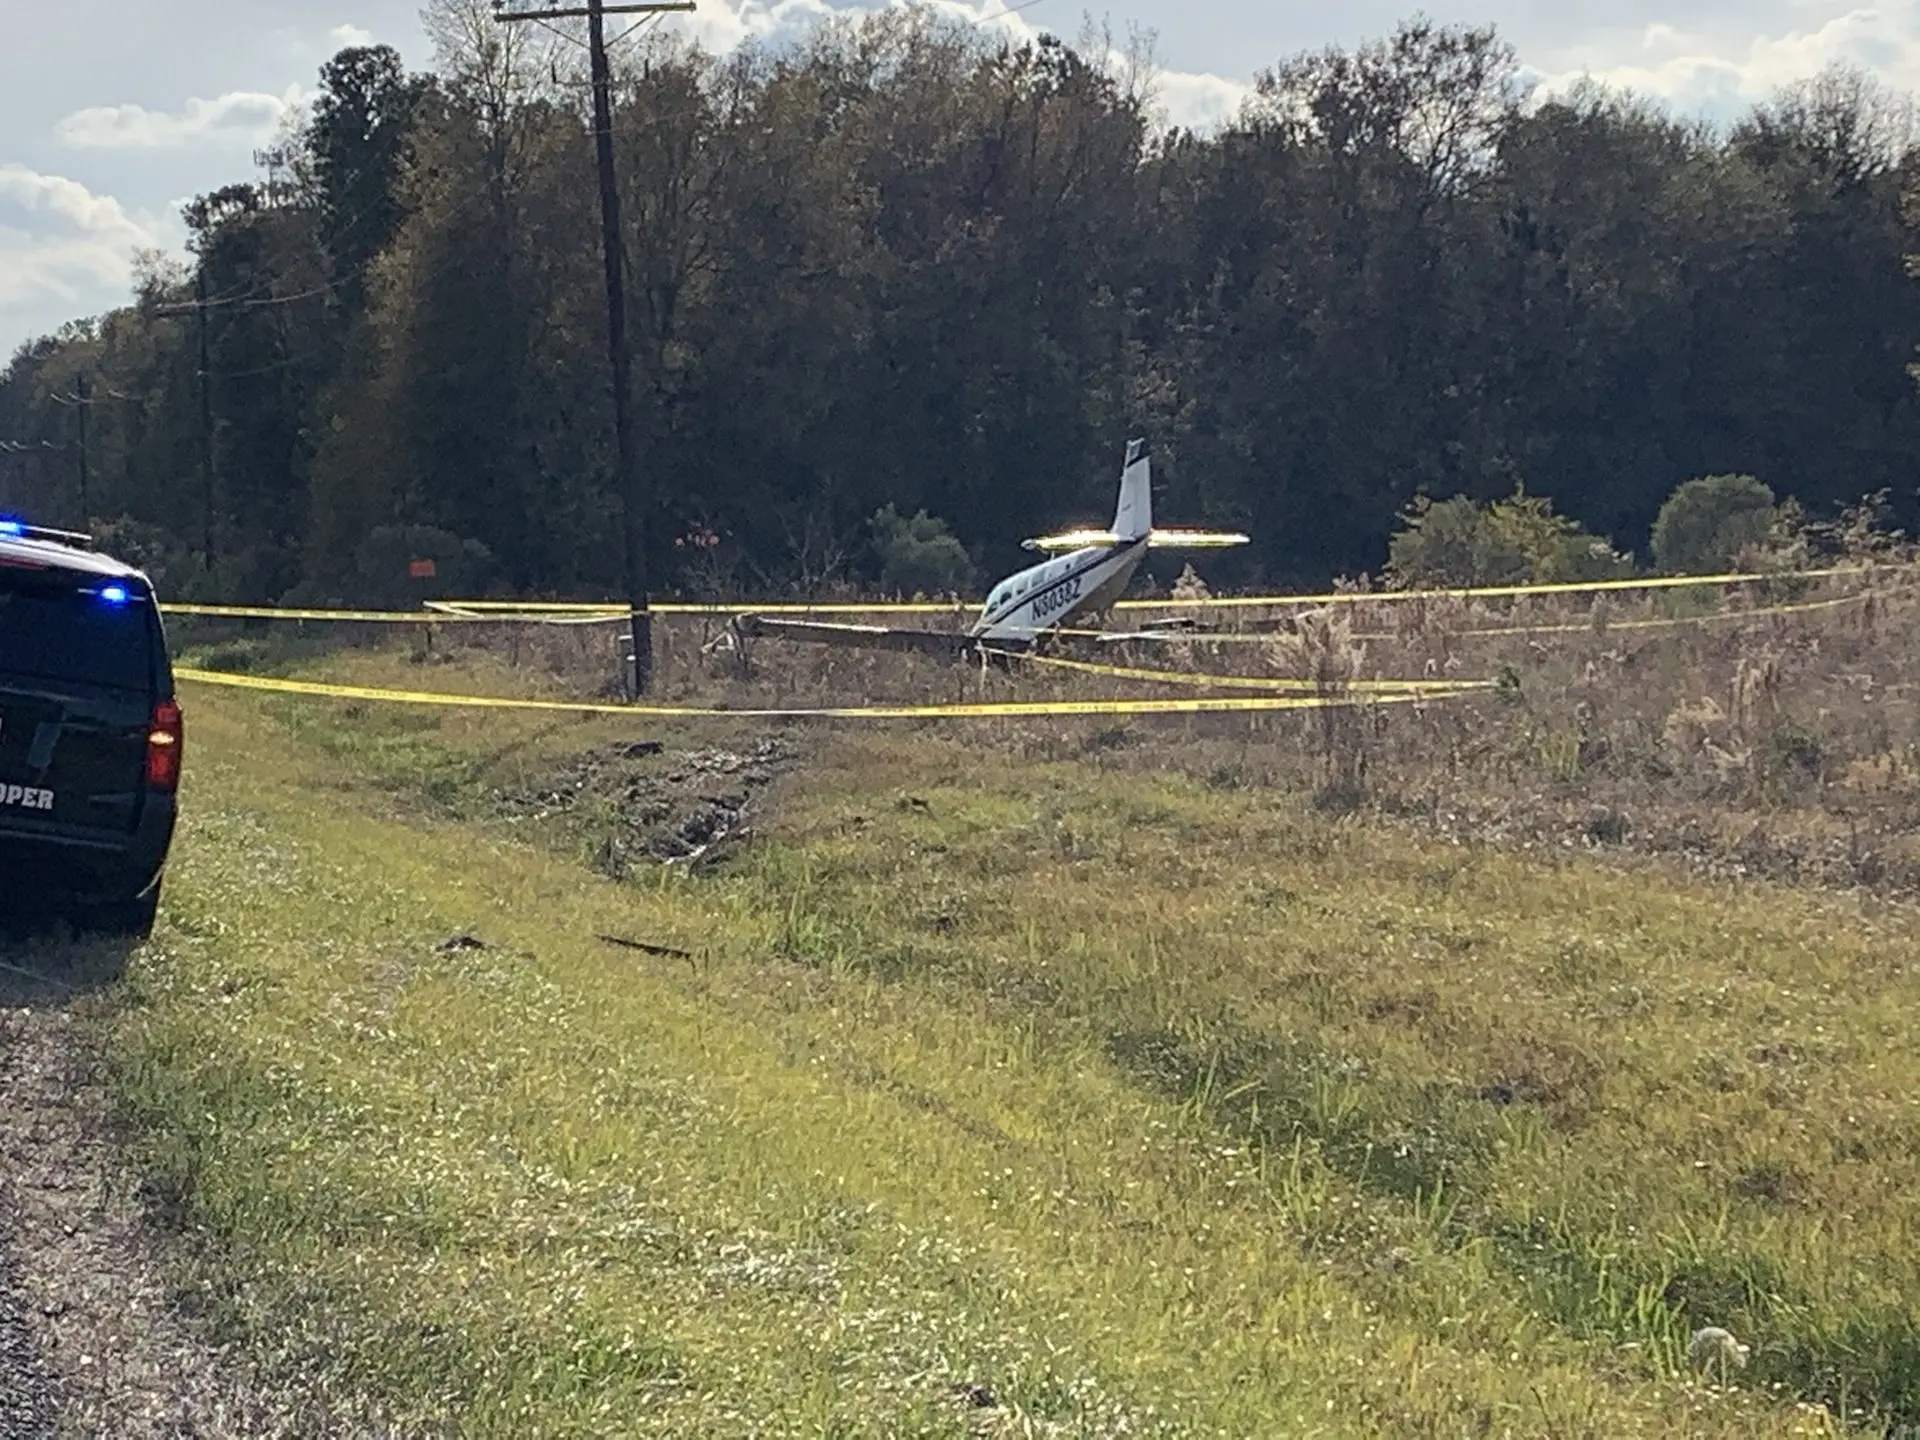 Courtesy photo  A Beechcraft airplane made an emergency landing after suffering a power failure on Thursday on U.S. 59. During the landing, the plane struck a vehicle; however, no injuries were reported.